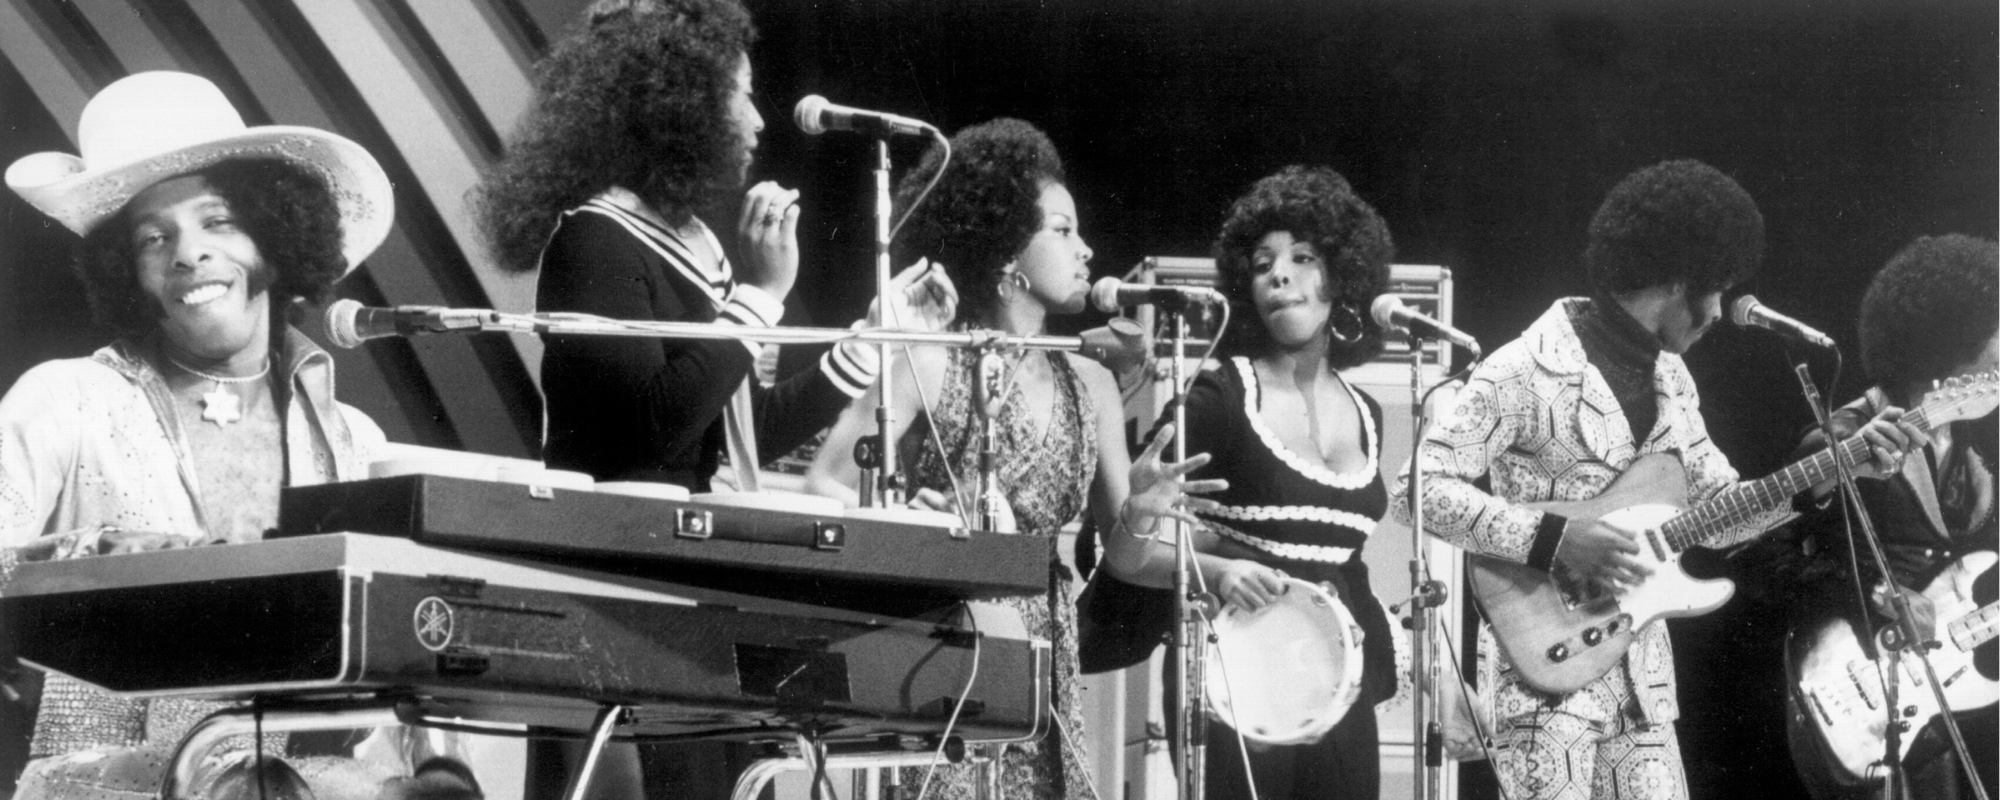 Top 6 R&B Songs from the 1970s